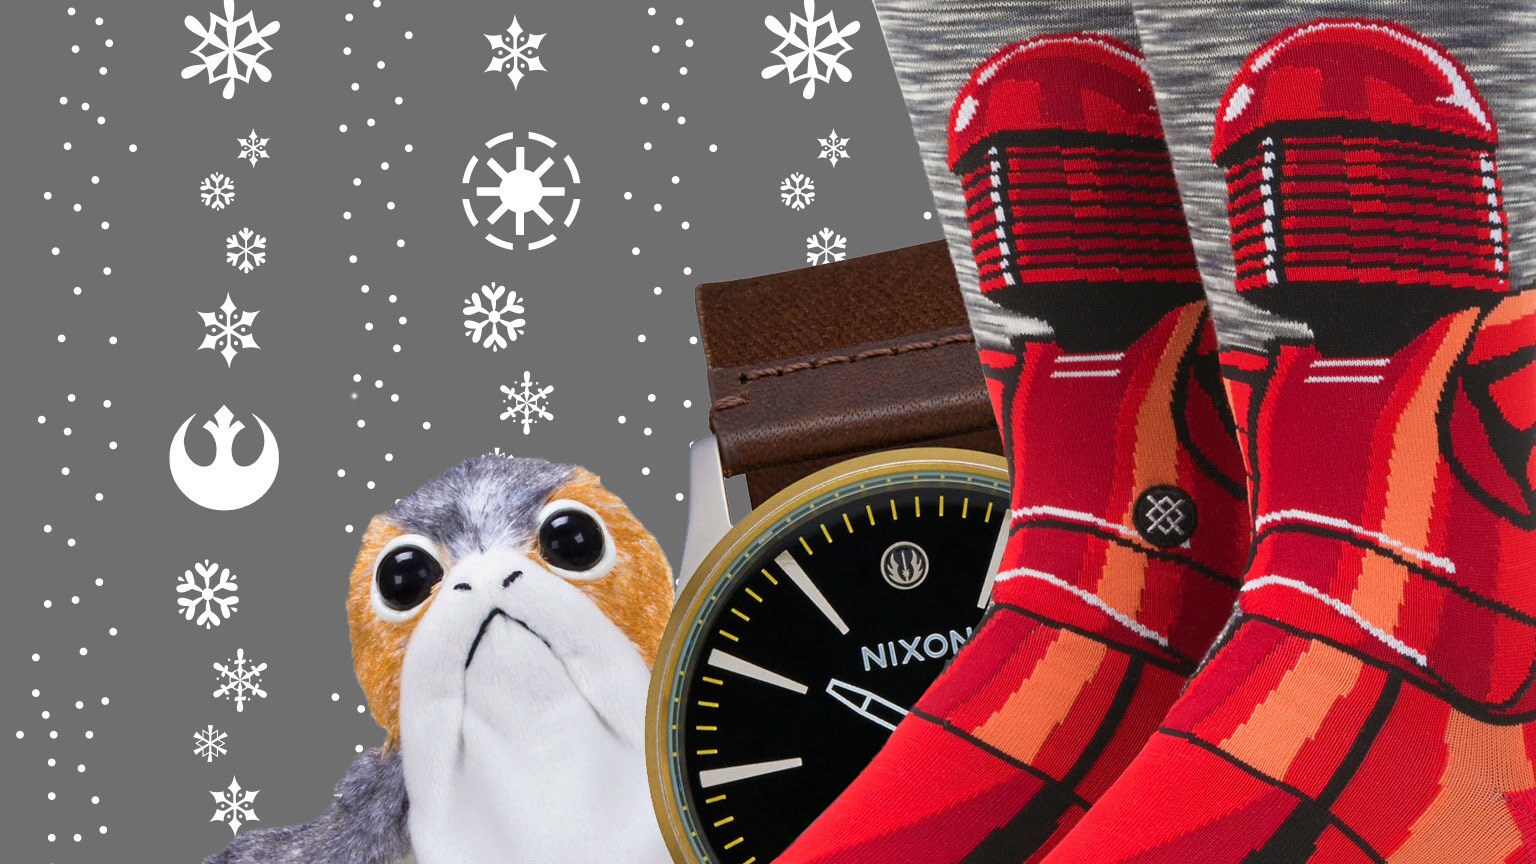 5 Last-Minute Star Wars: The Last Jedi-Themed Holiday Gift Ideas